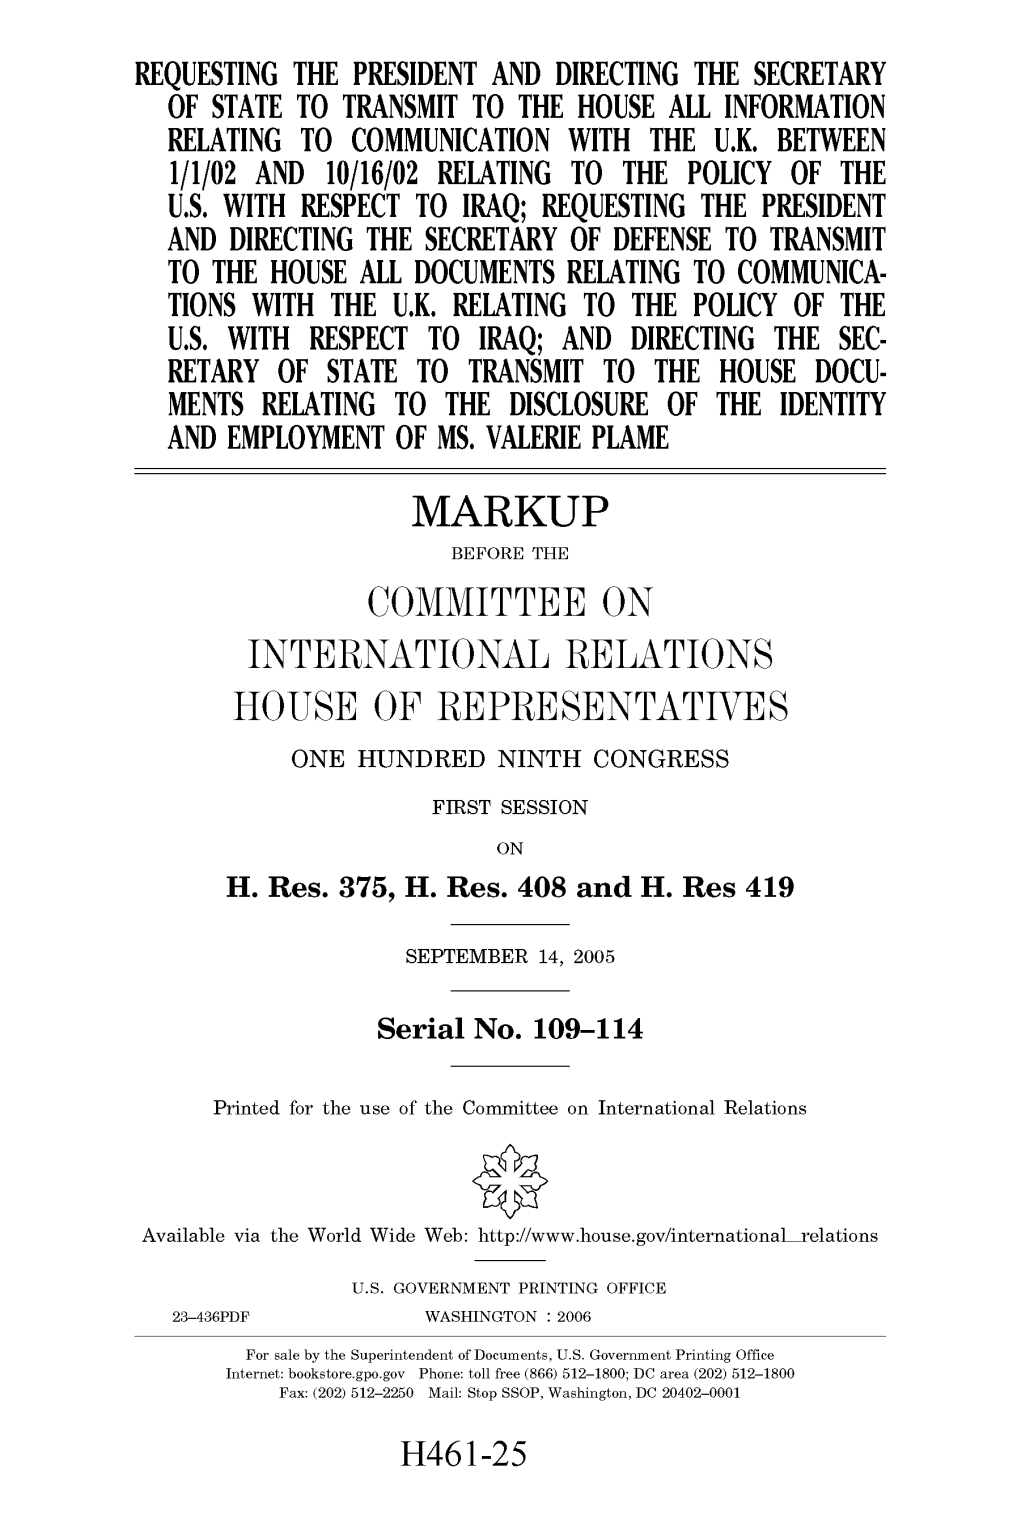 Markup Before the Committee on International Relations House of Representatives One Hundred Ninth Congress